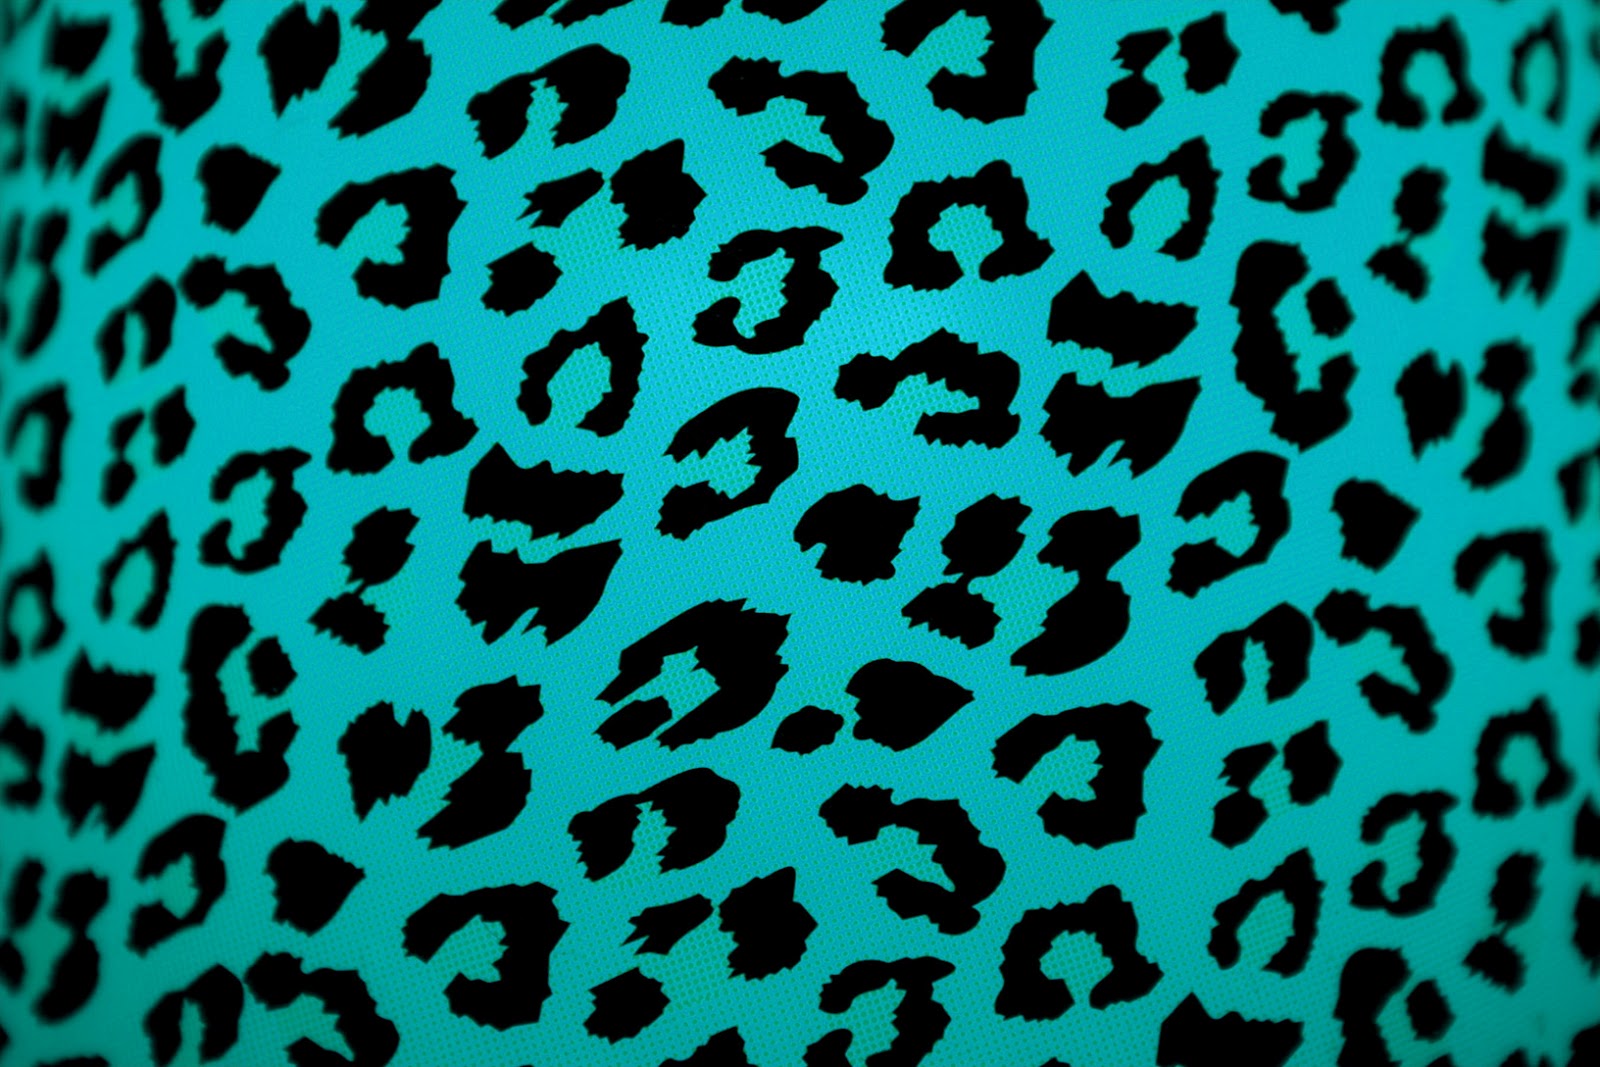  Leopard Print Pattern Backgrounds For PowerPoint   Pattern PPT 1600x1067